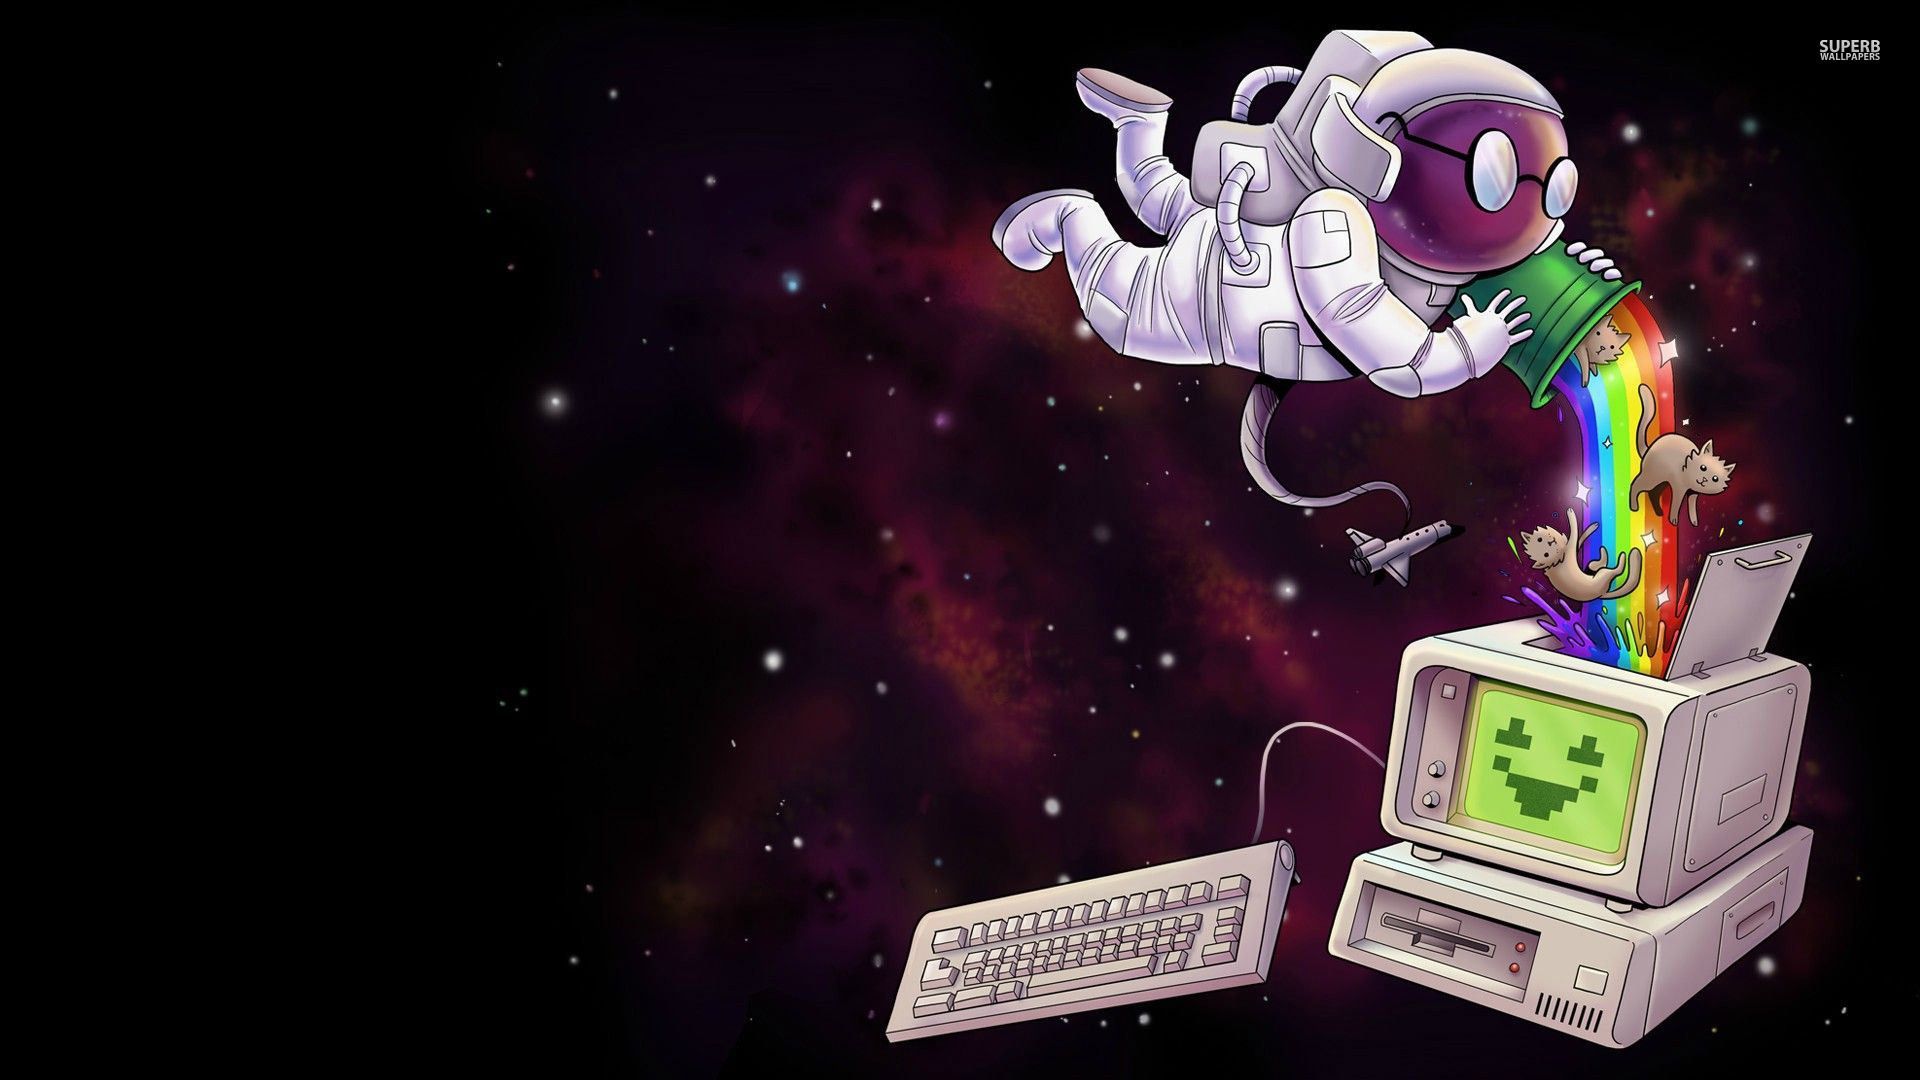 astronaut-gathering-nyan-cats-in-a-computer-28540-1920x1080.jpg